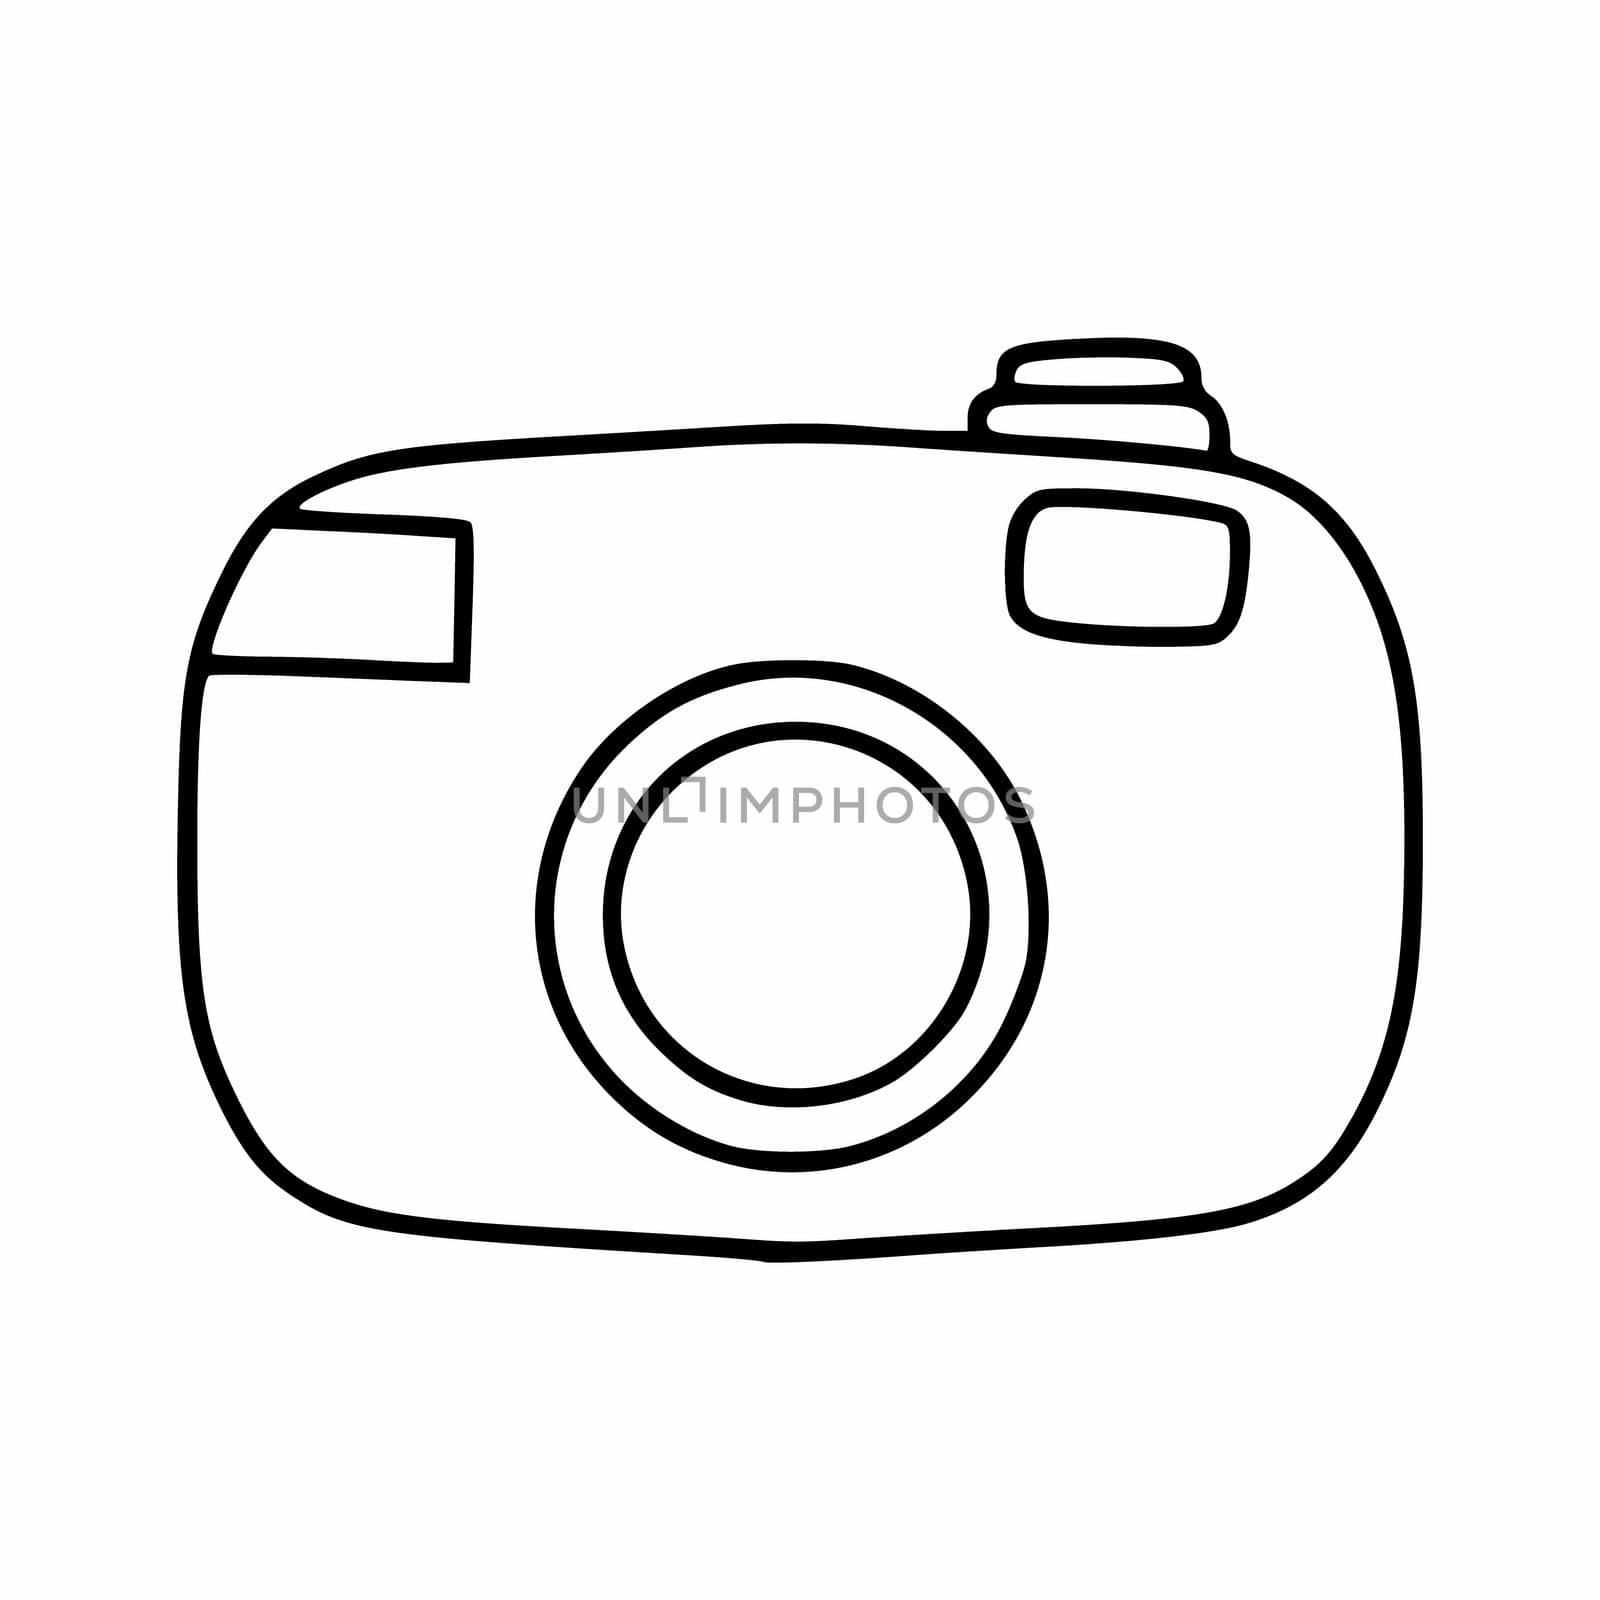 Icon camera in the style of Doodle. Cute camera with a black contour line. Hand-drawn drawing.